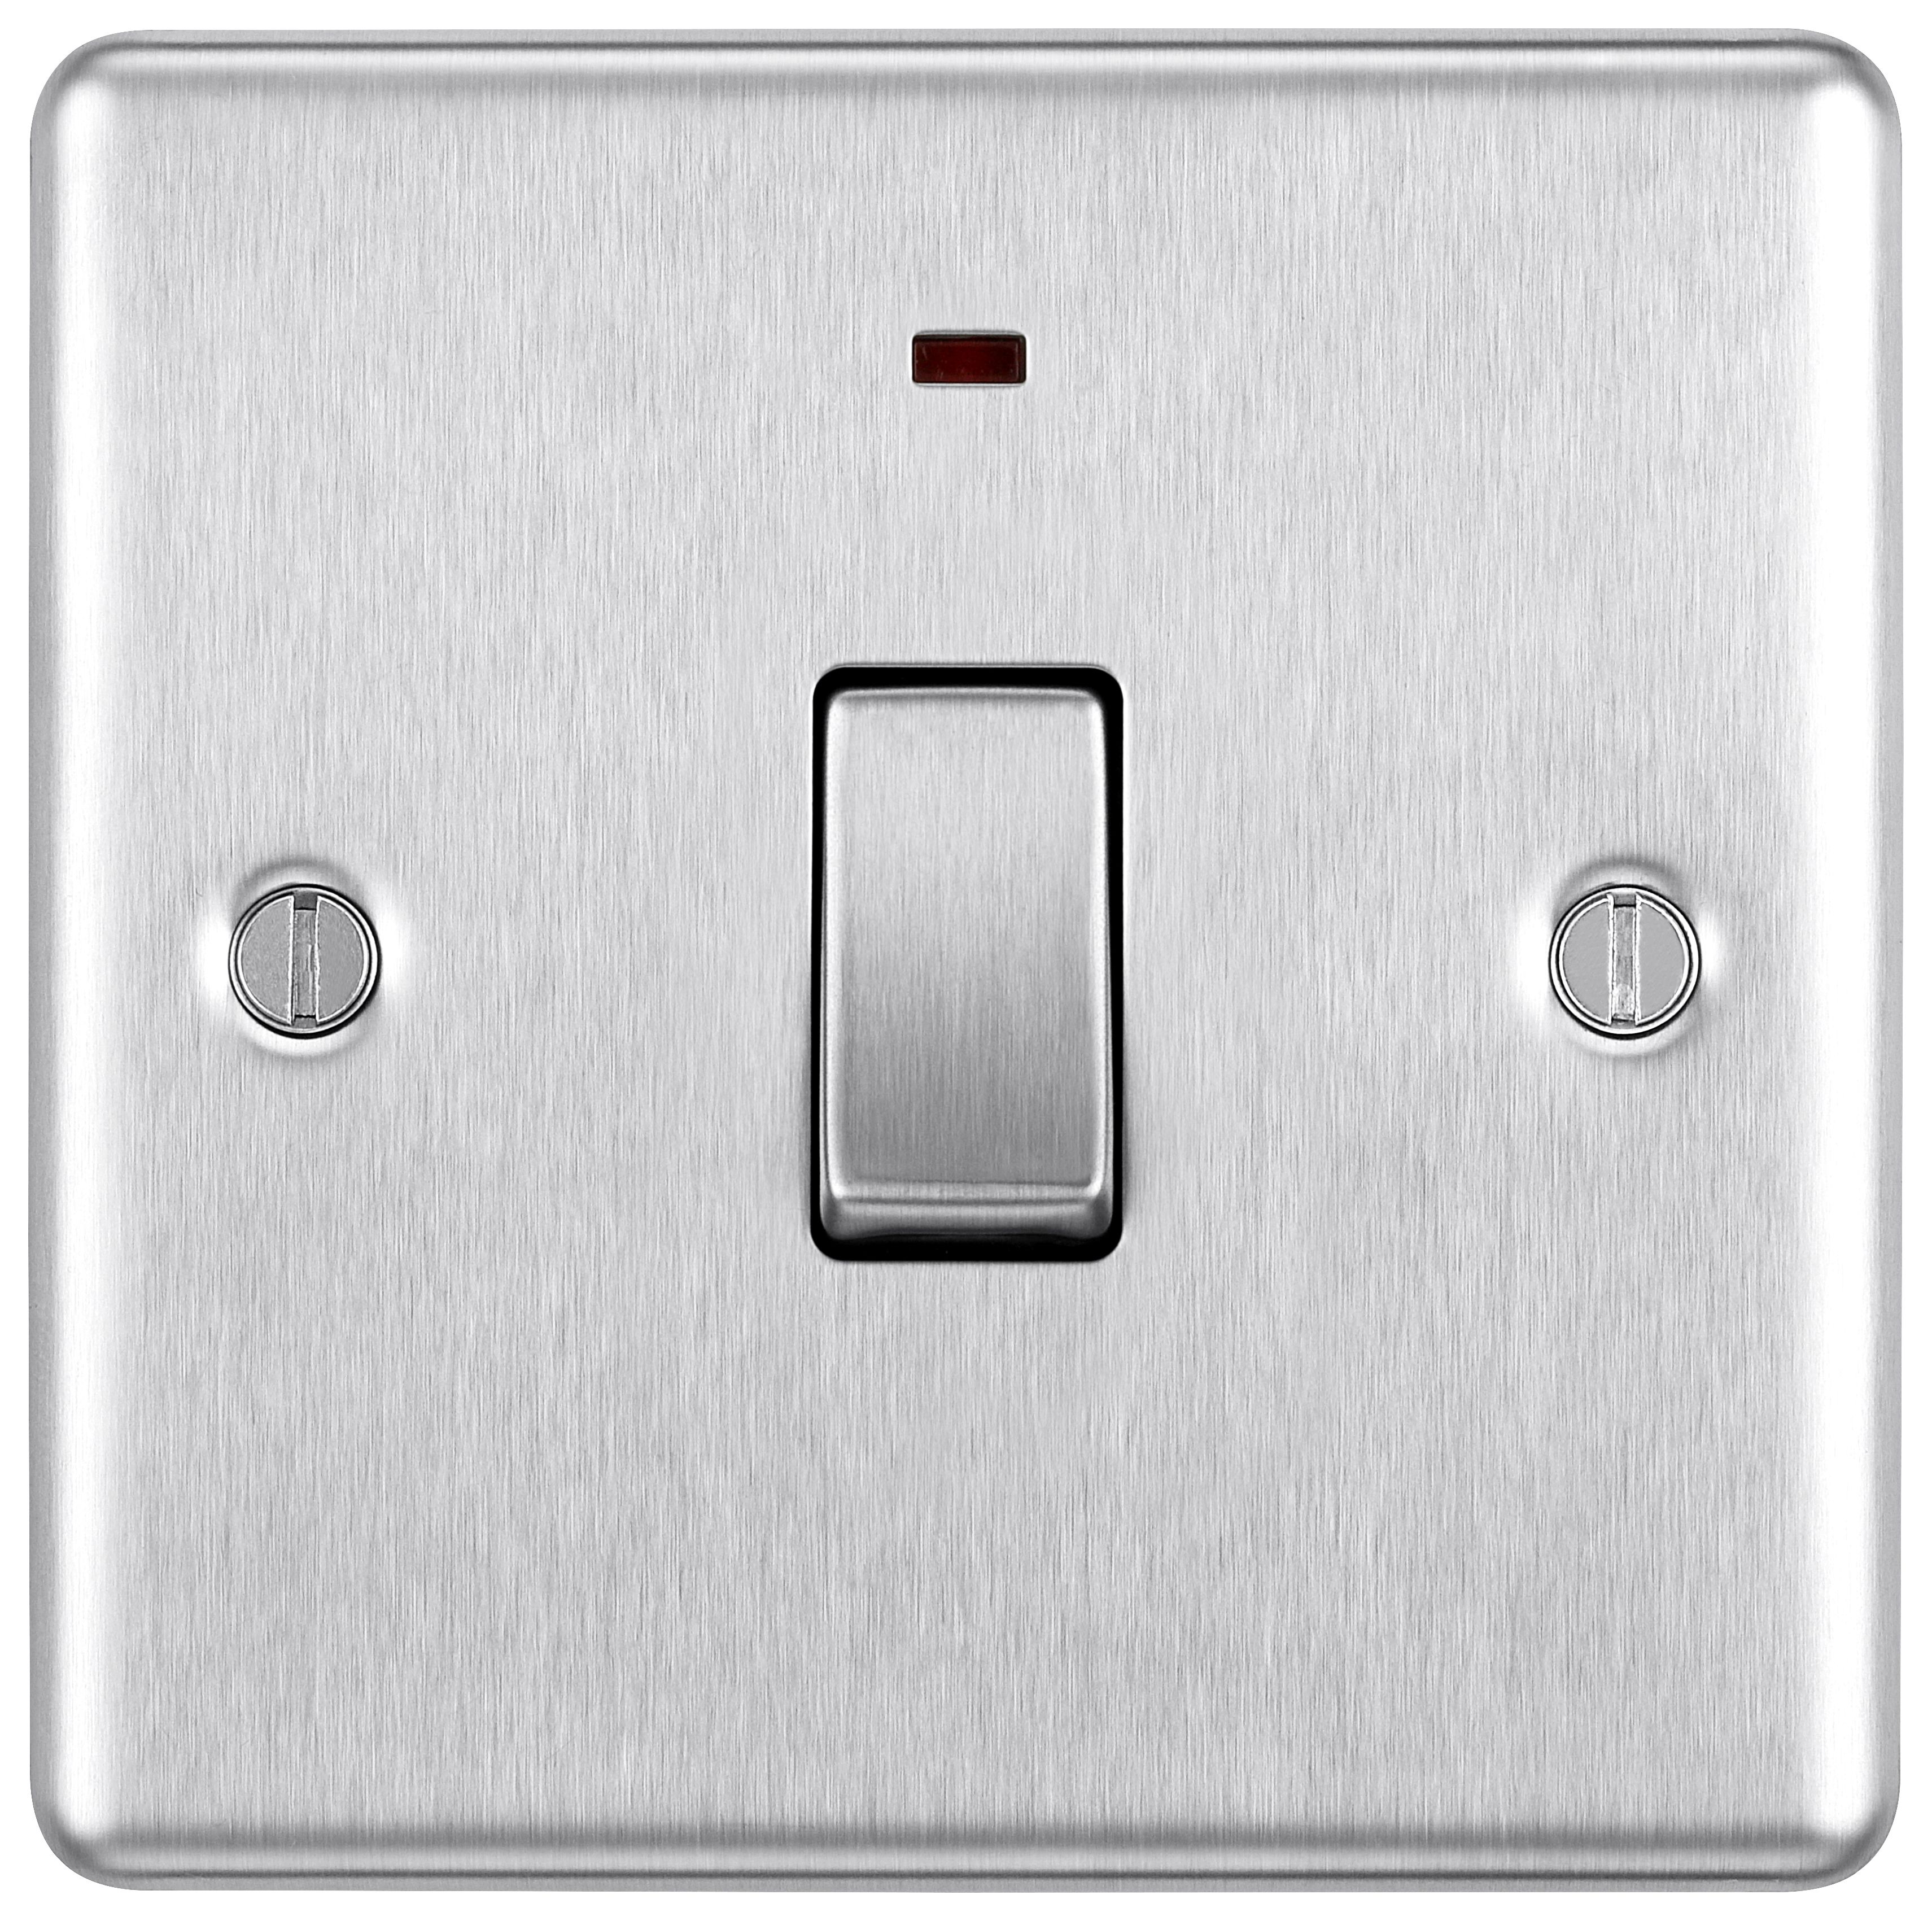 BG 20A Screwed Raised Plate Single Switch With Power Indicator - Brushed Steel